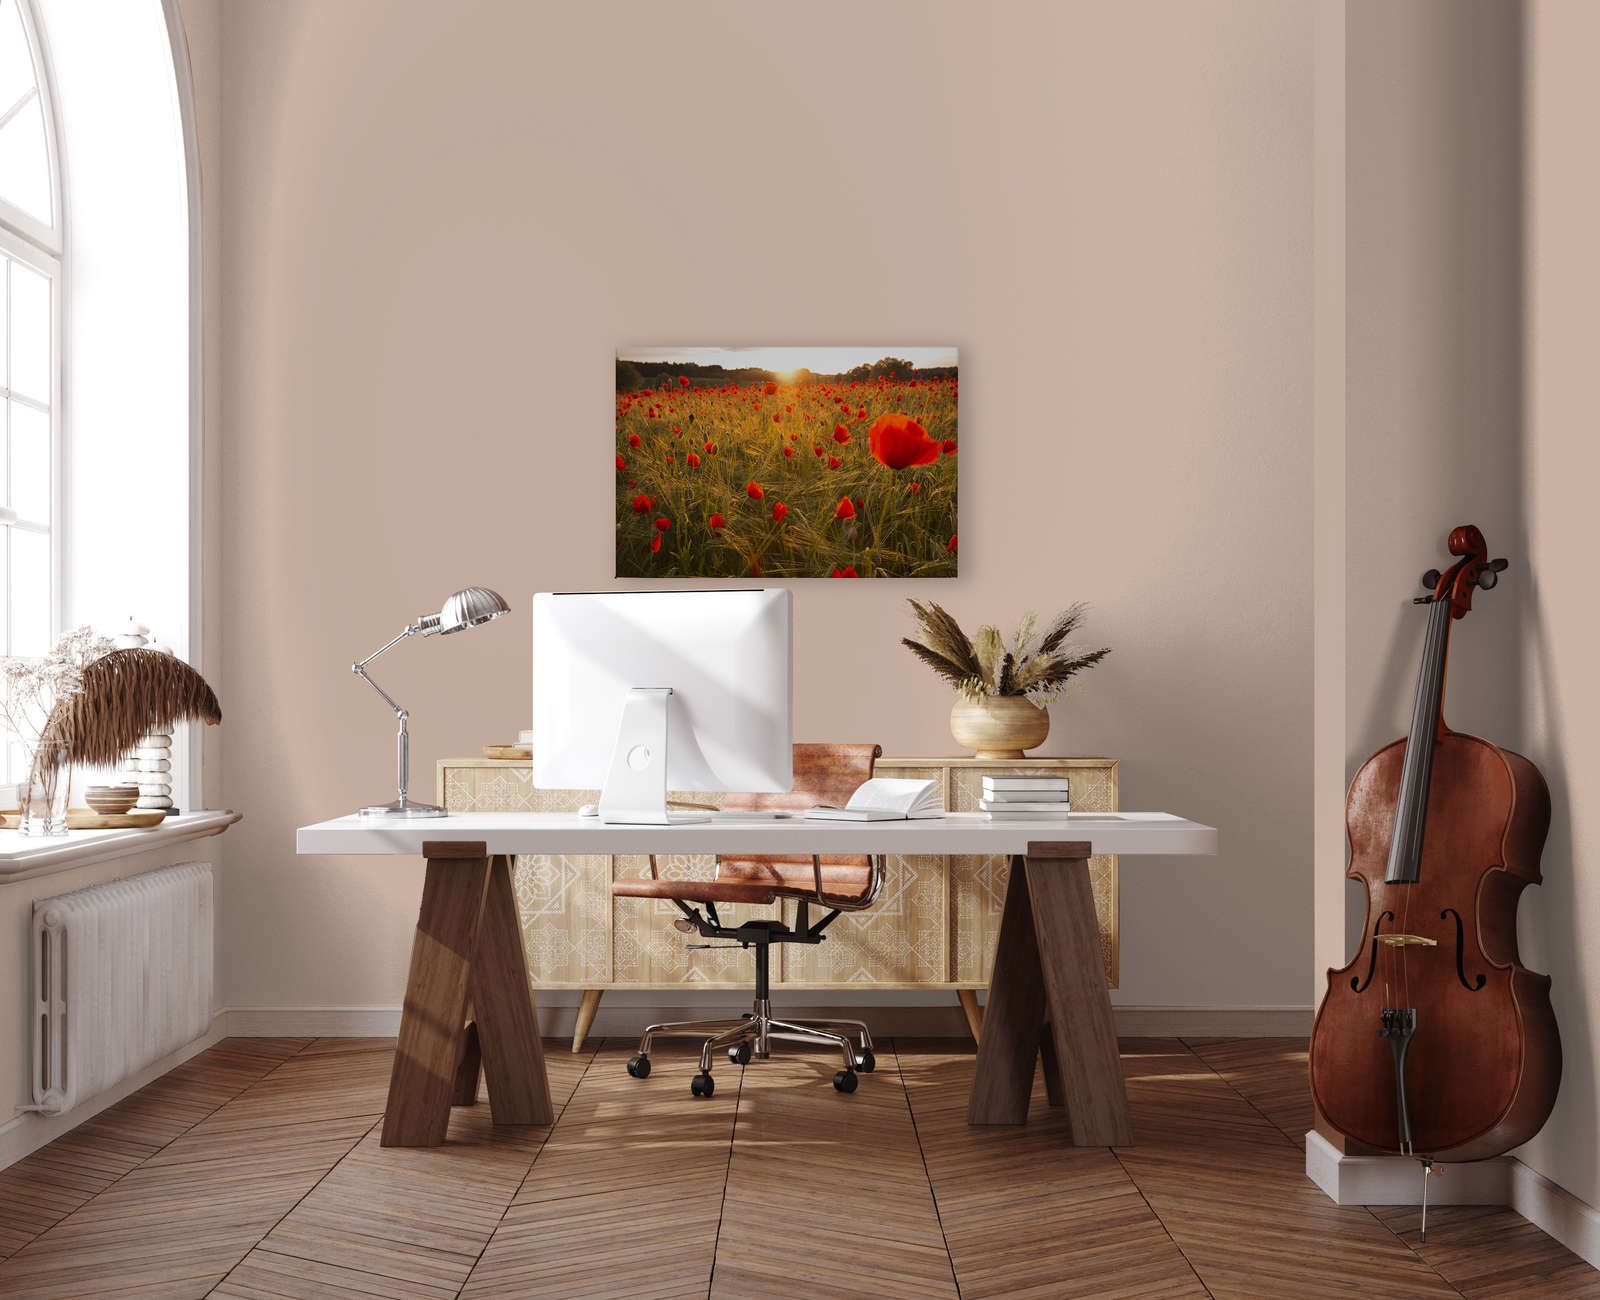             Canvas painting Landscape with poppy meadow - 0,90 m x 0,60 m
        